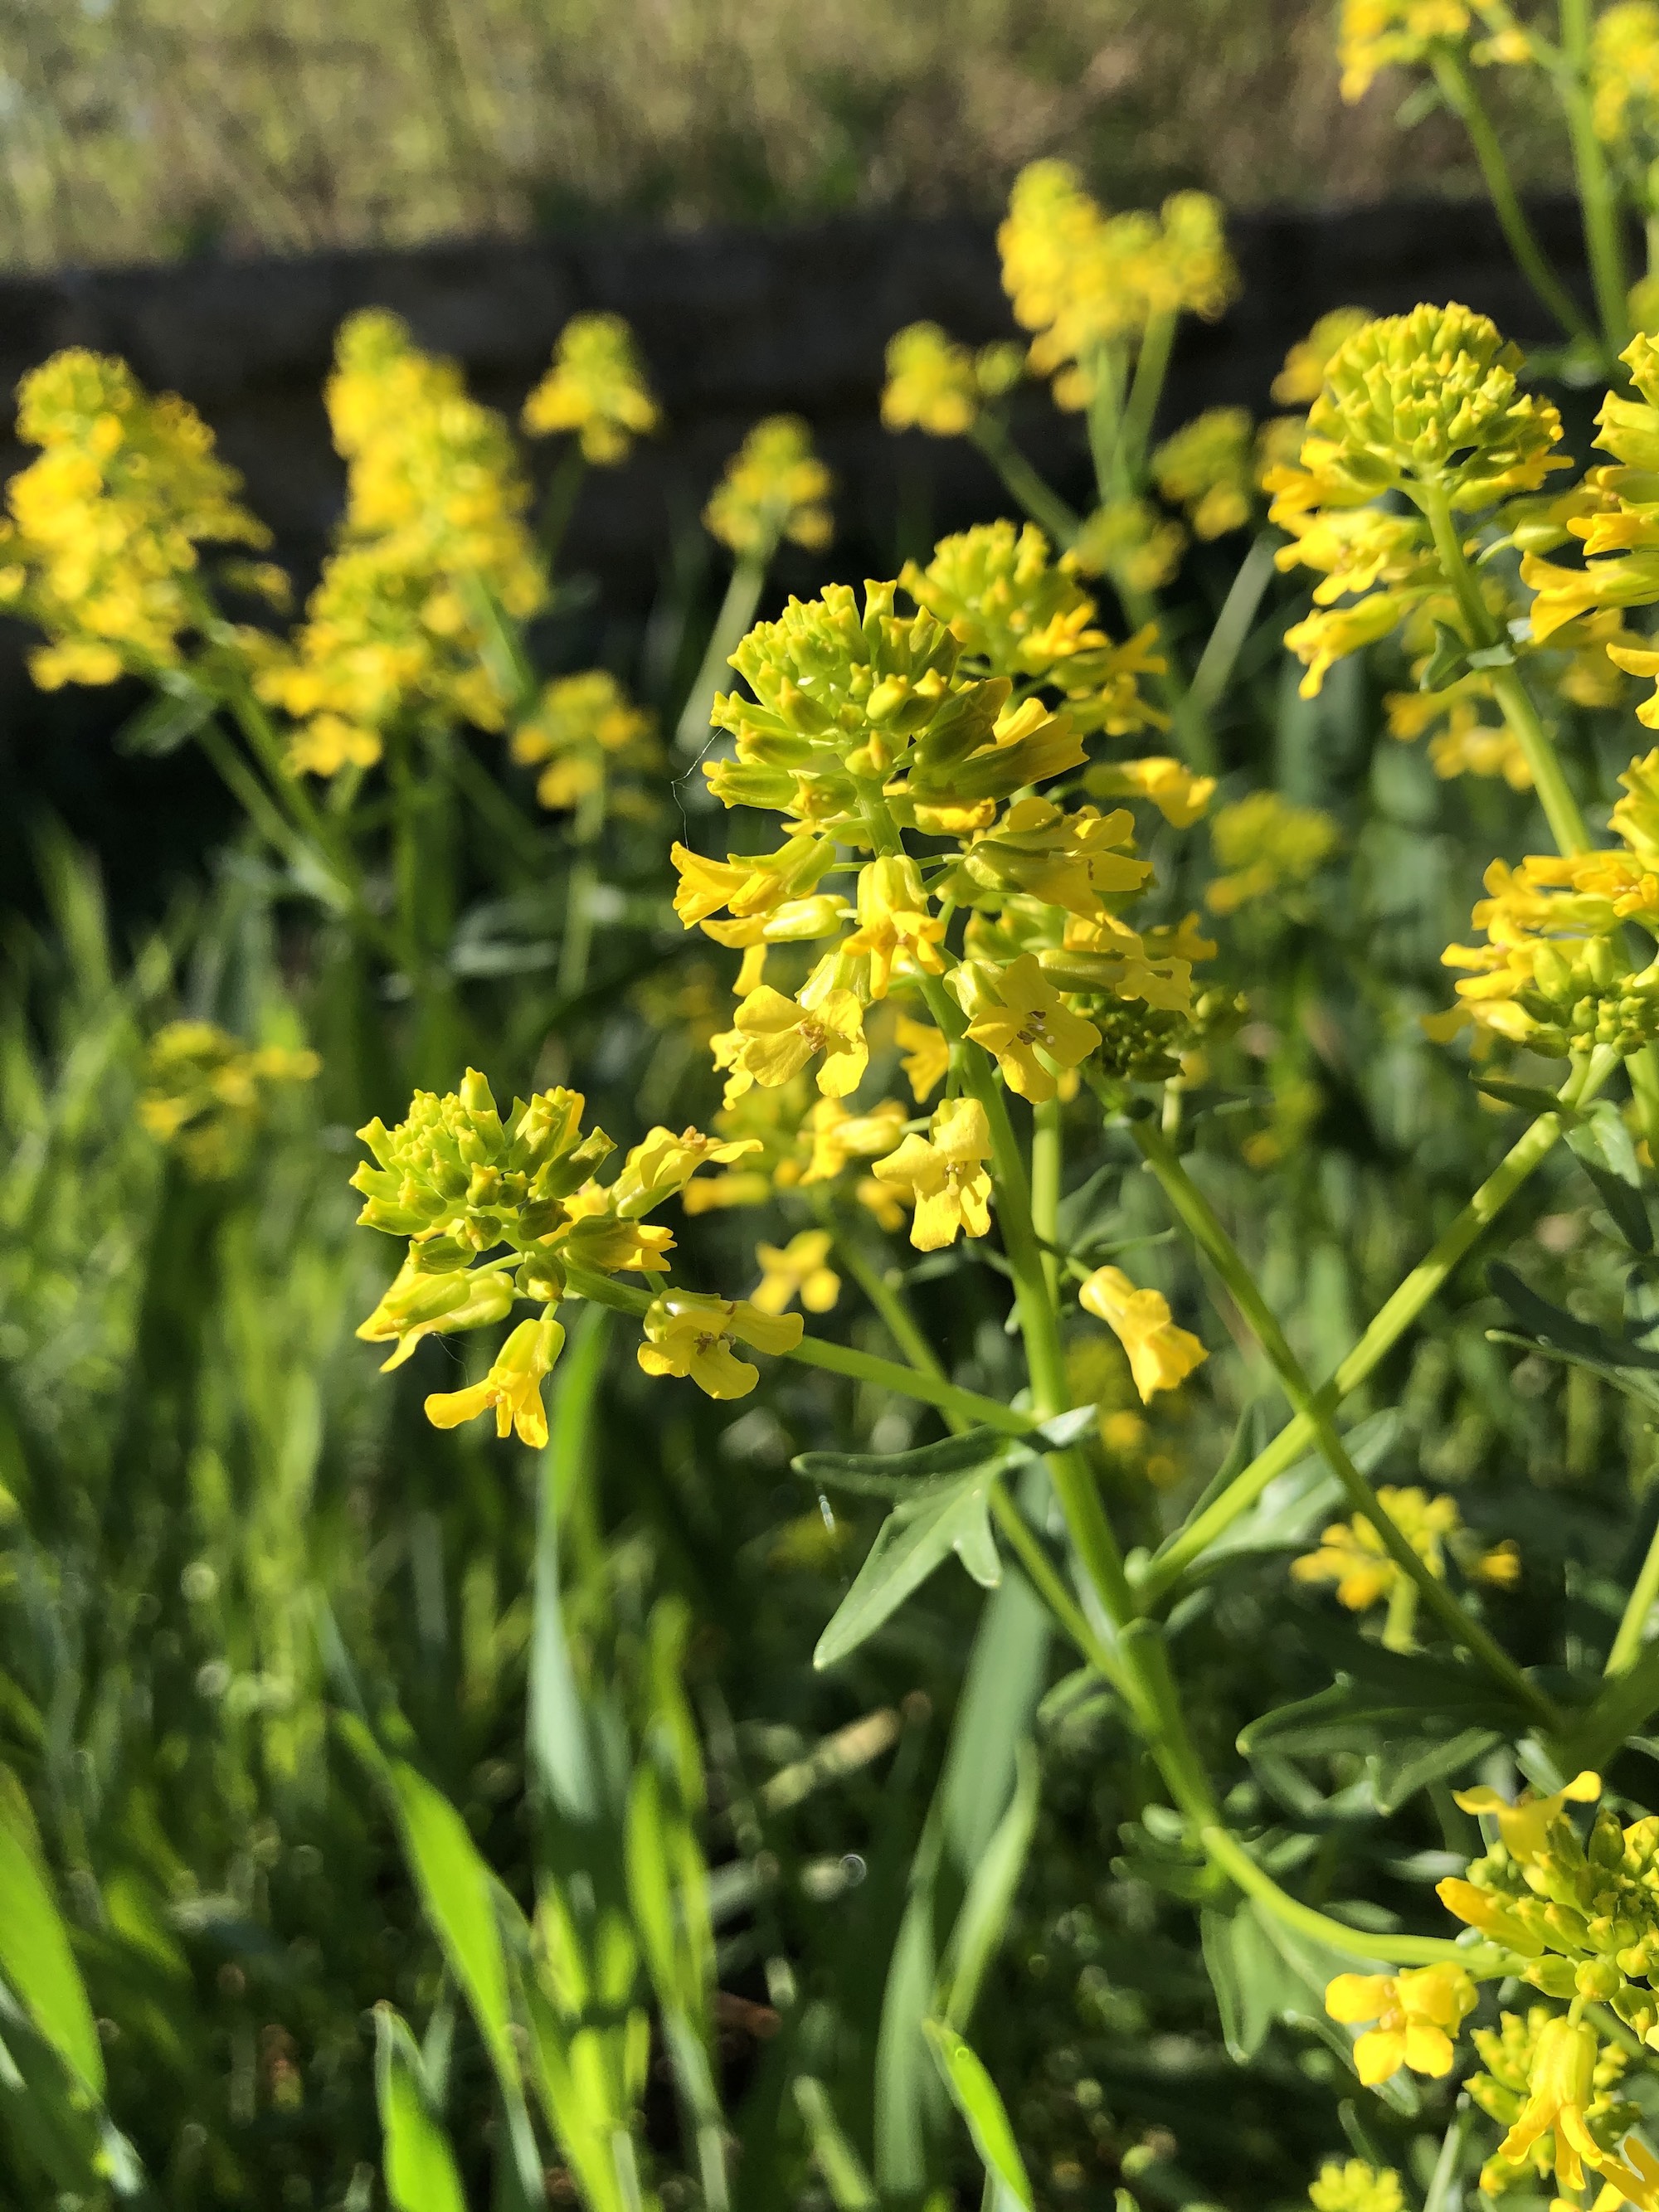 Garden Yellow Rocket near Duck Pond in Madison, Wisconsin on May 5, 2021.